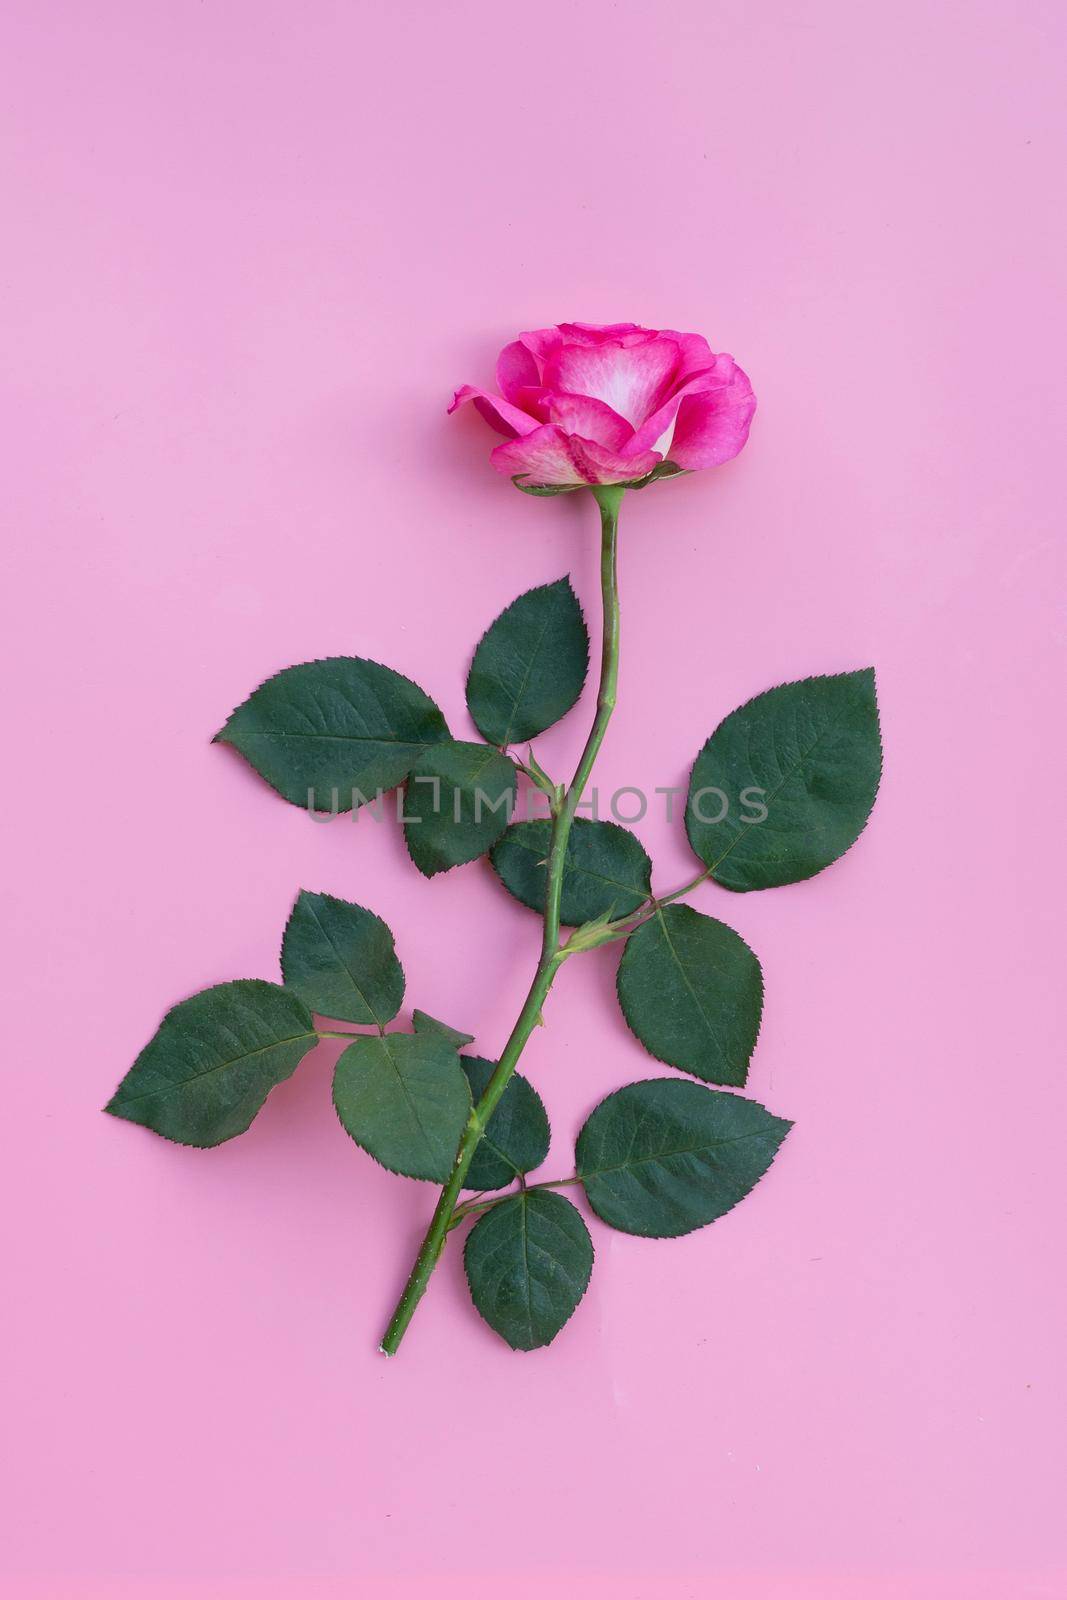 Rose on pink background.  Valentine's day concept background